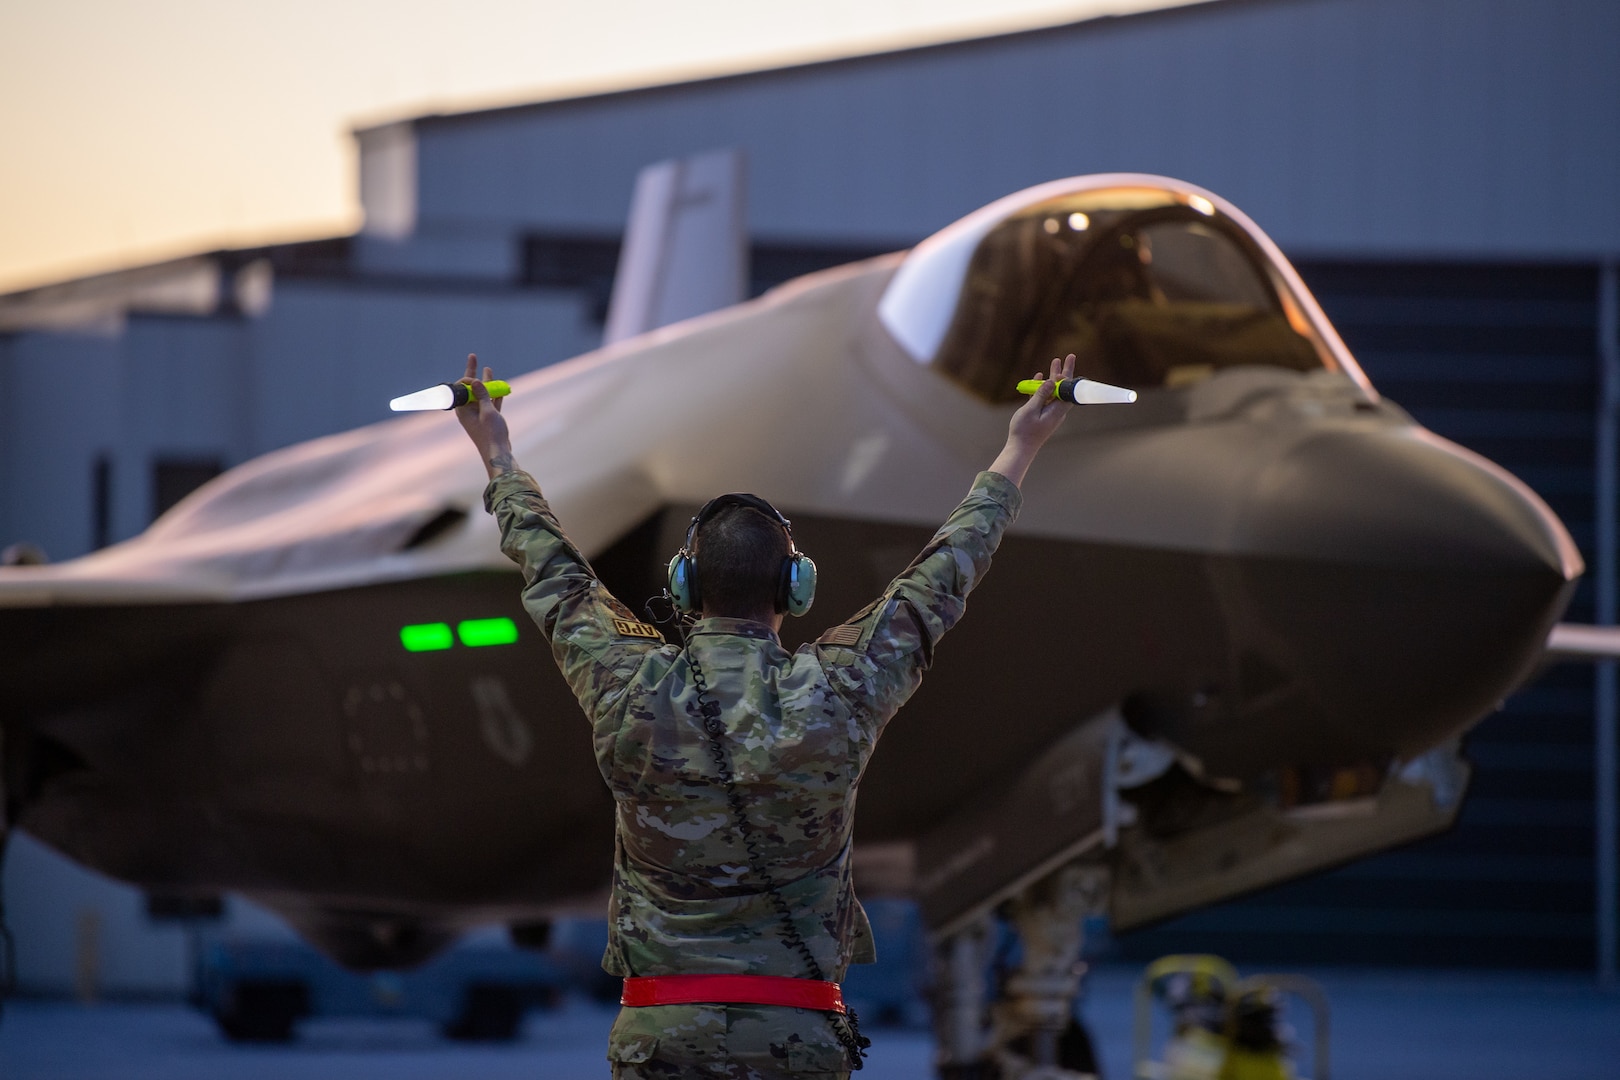 A crew chief assigned to the 158th Fighter Wing taxis an F-35A Lightning II fifth-generation aircraft assigned to the wing at the Vermont Air National Guard Base, South Burlington, Vermont, May 2, 2022. The aircraft departed to Spangdahlem Air Base, Germany, to continue NATO’s Enhanced Air Policing mission along the eastern flank.